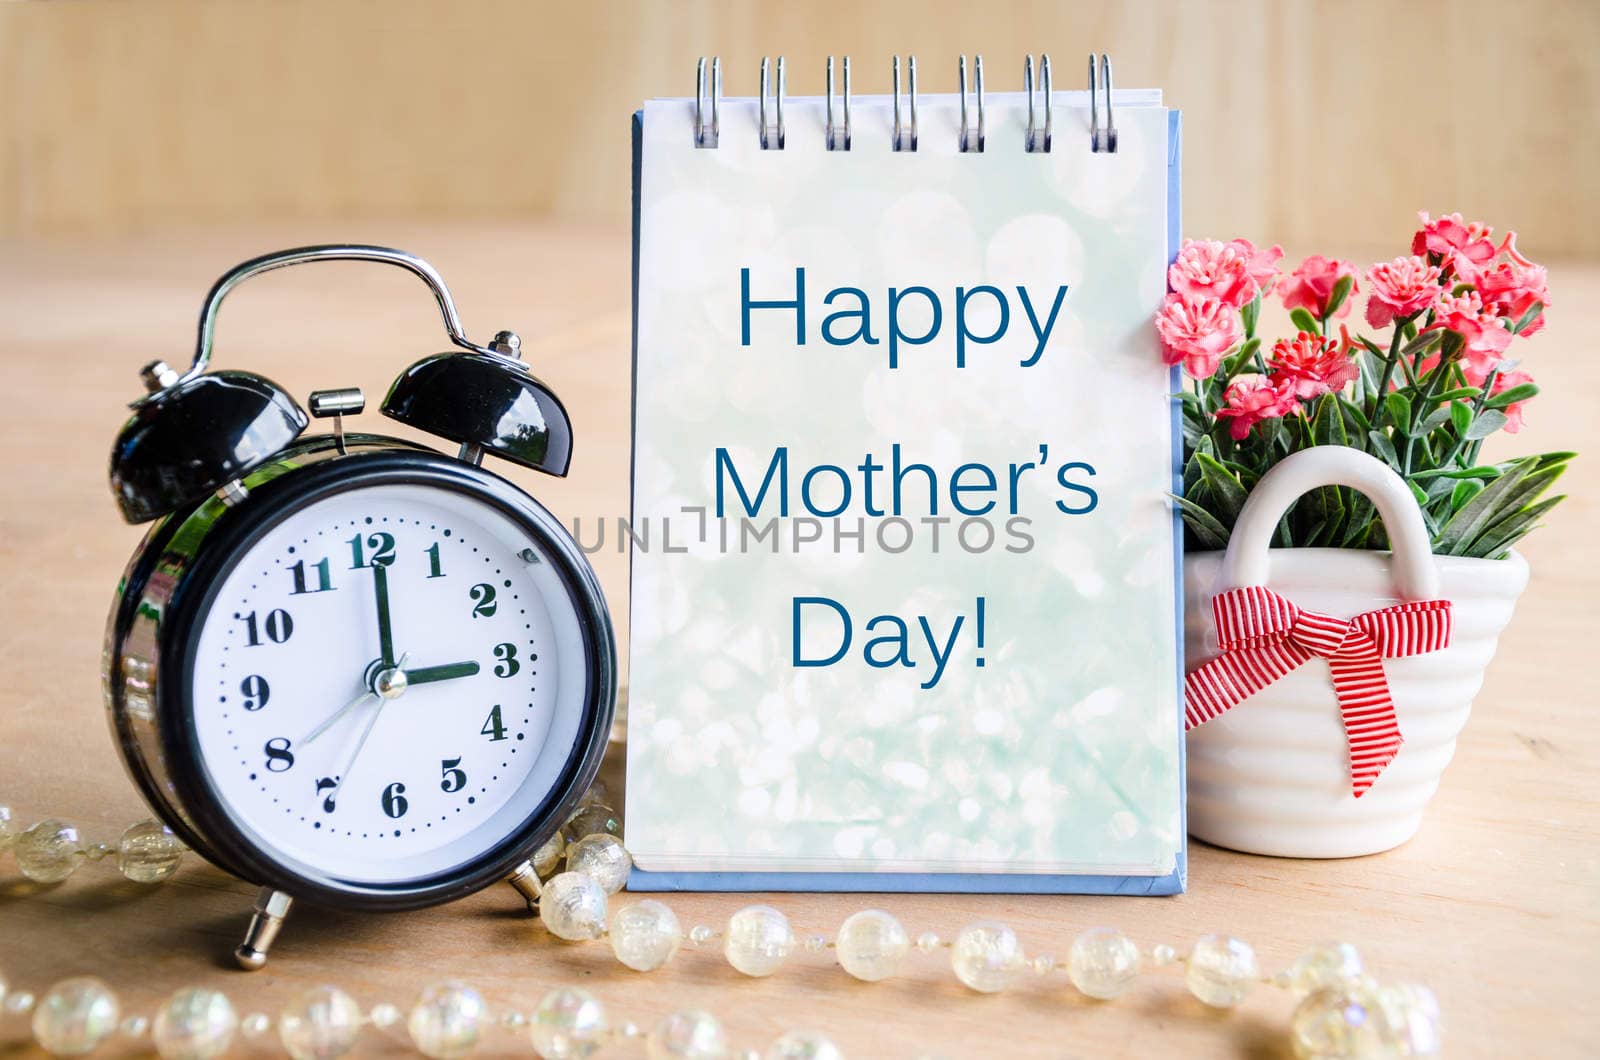 Mothers day card and alarm clock with flowers on wooden background.